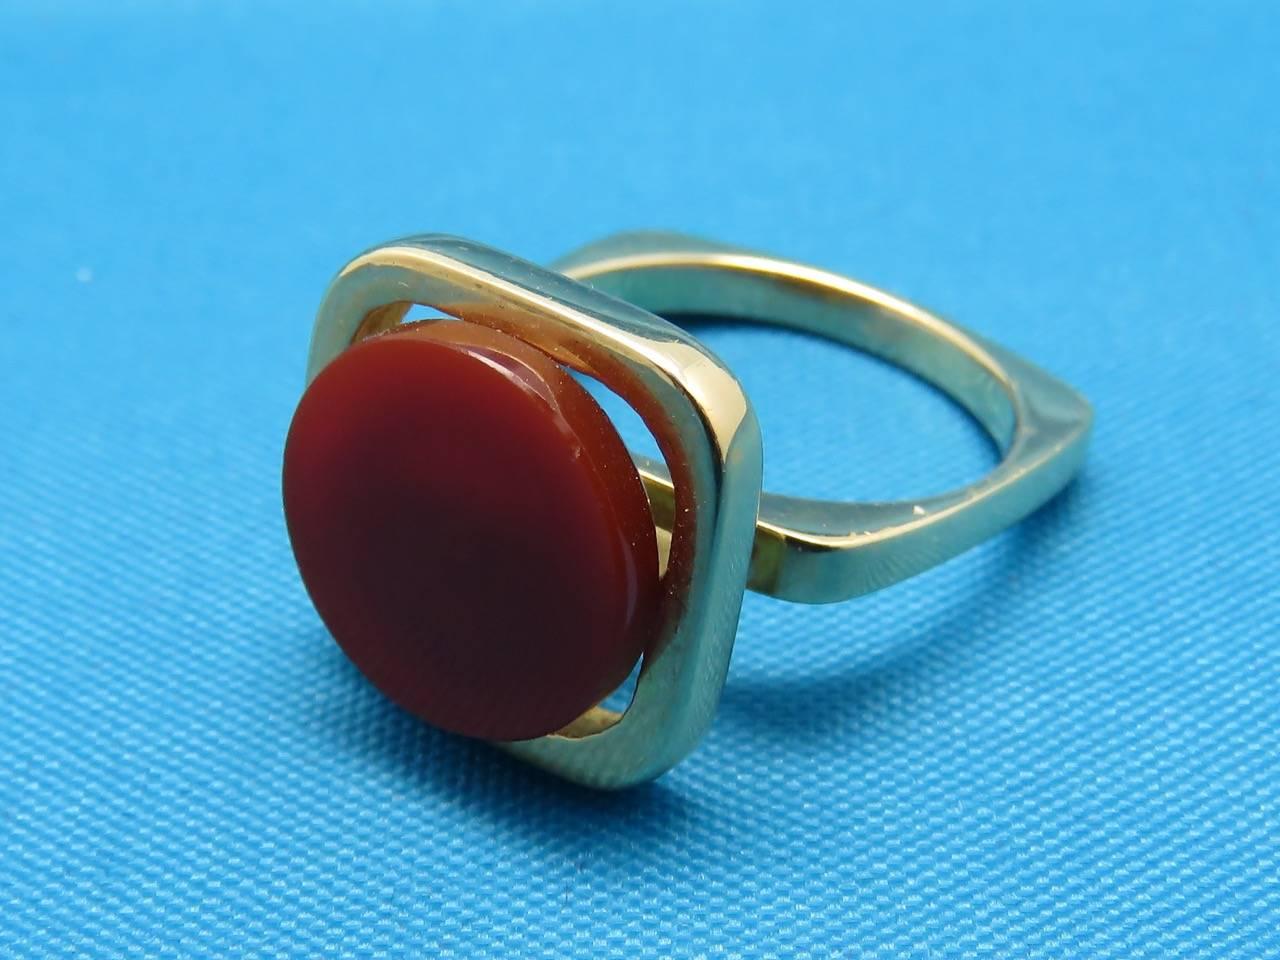 Yellow Gold and Carnelian Ring.
Signed by Pierre Cardin
Circa 1980
Measurements:
Ring Size: 6 
Weight: 7.70 Grams